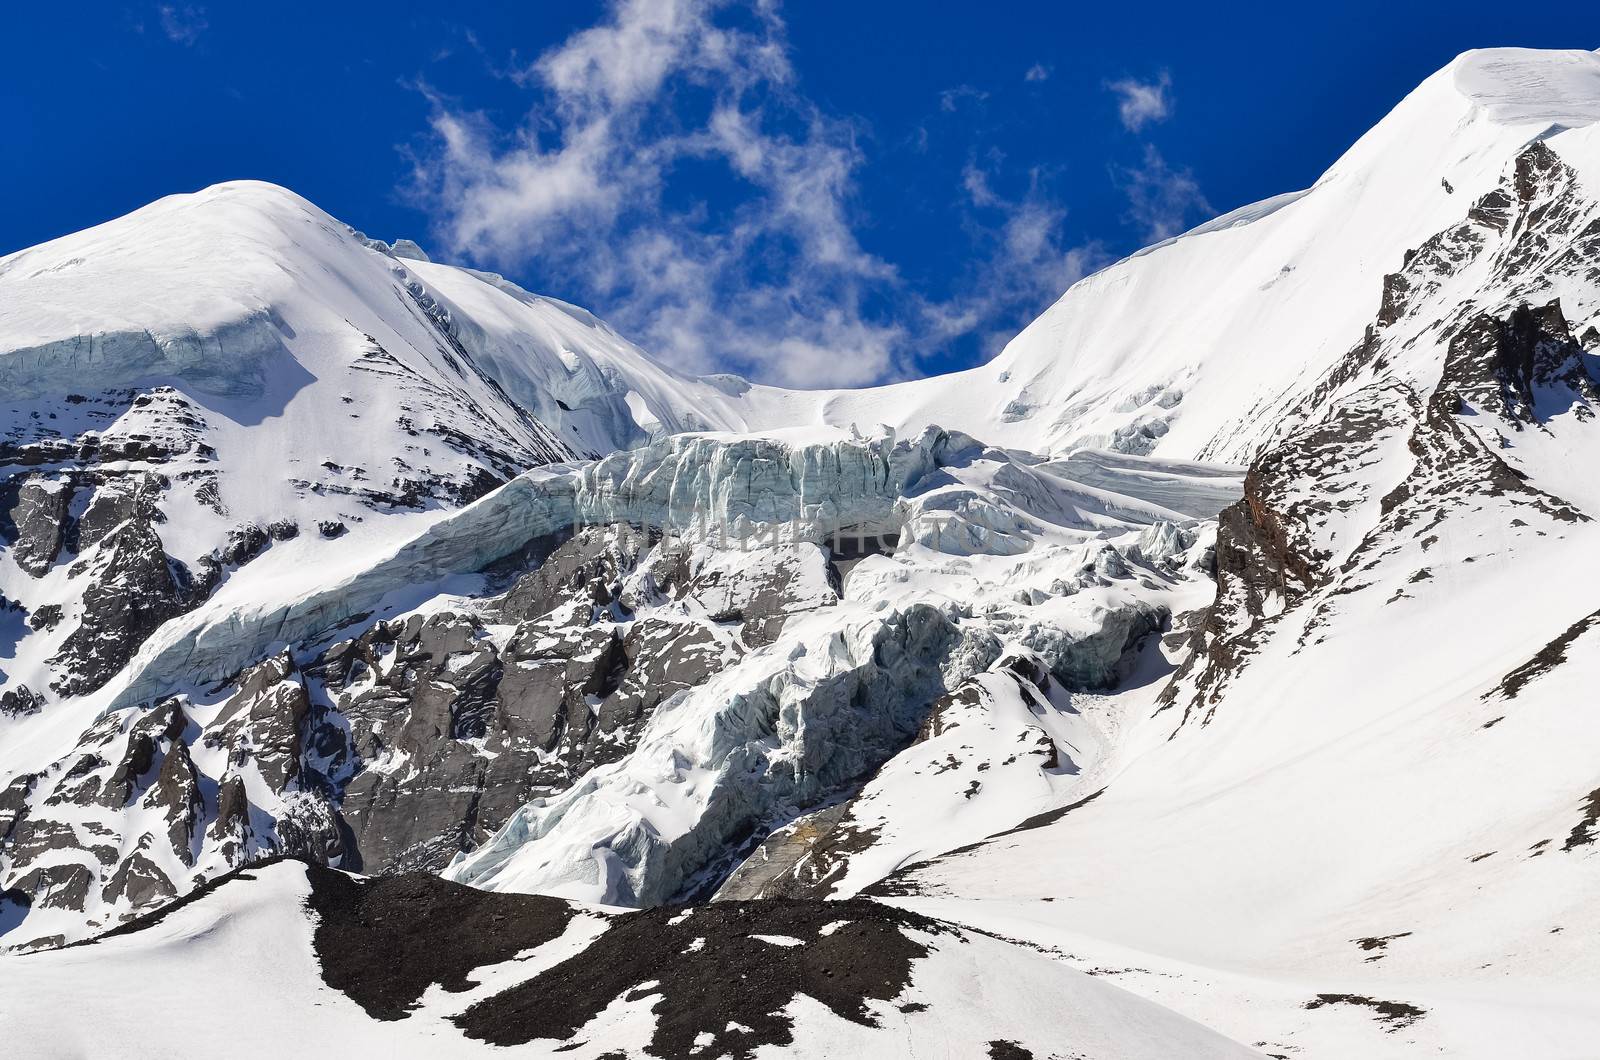 High mountain glacier and snow peaks and slopes, Himalayas, Nepal